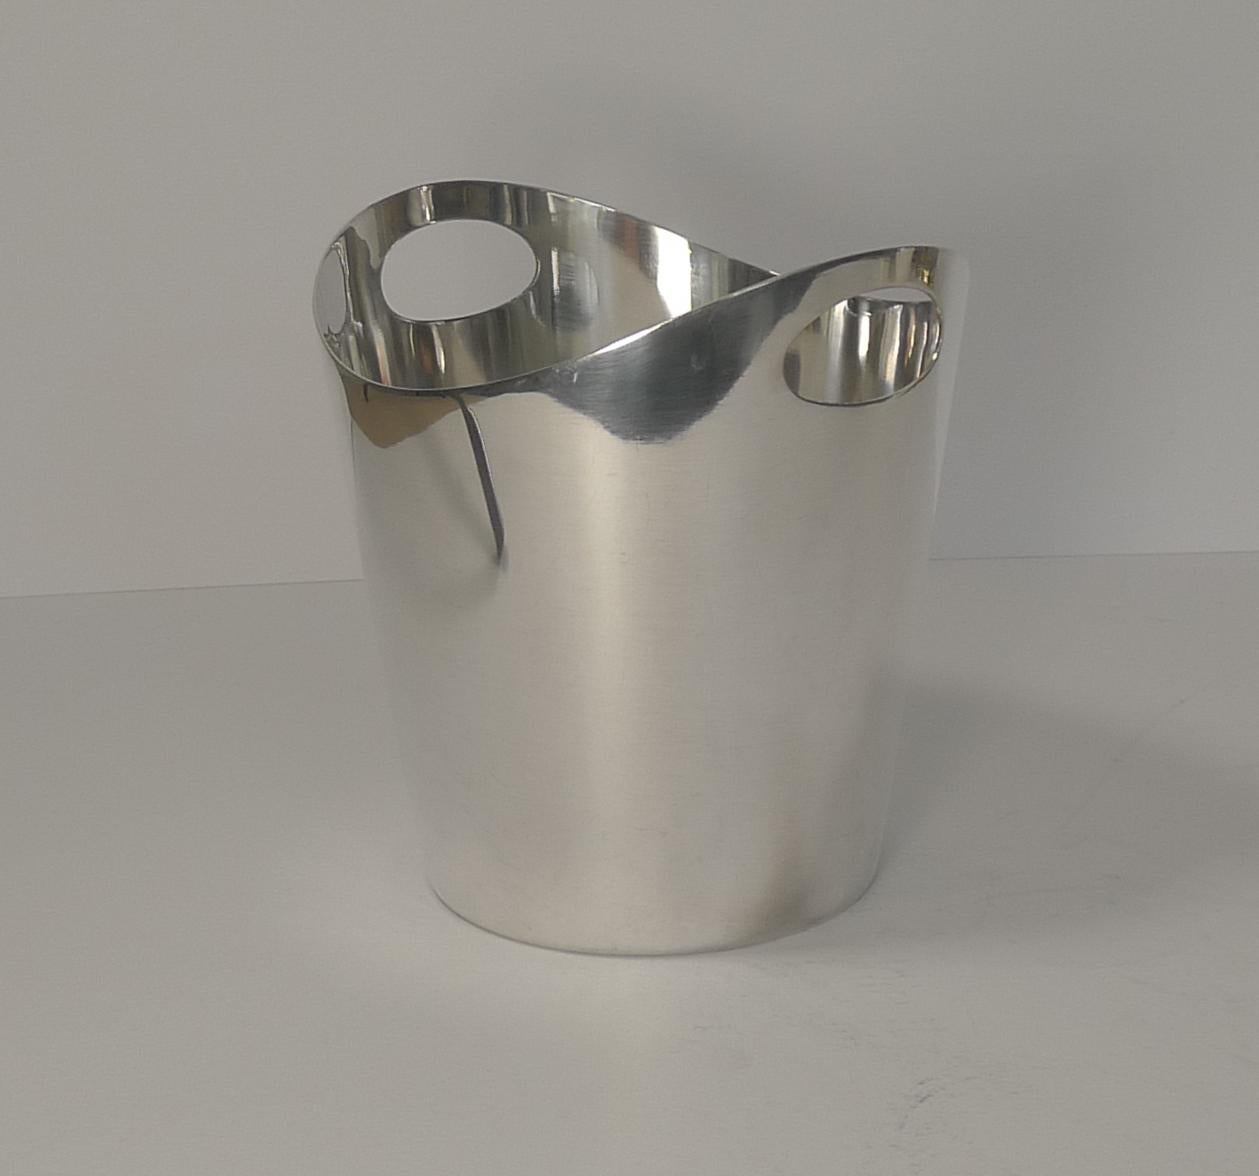 Rare English Modernist Silver Plated Ice Bucket by Walker & Hall, 1958 In Good Condition For Sale In Bath, GB